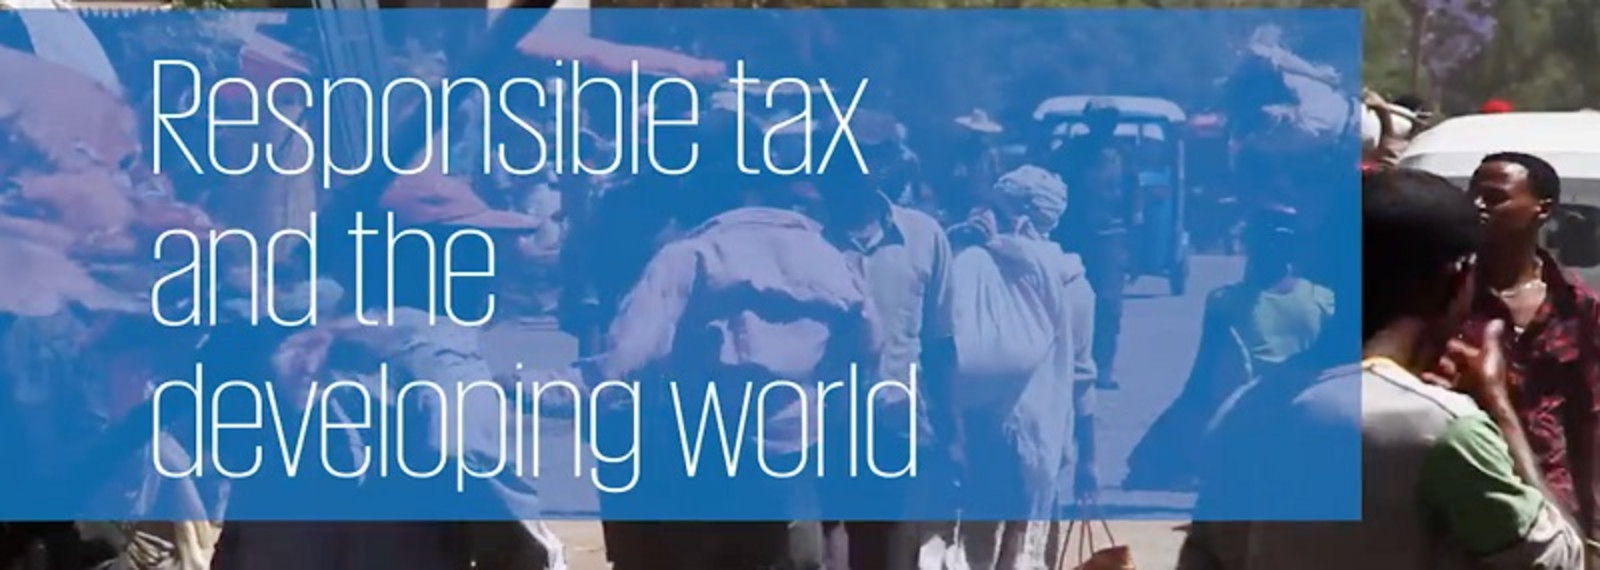 Image of Responsible Tax and the Developing World